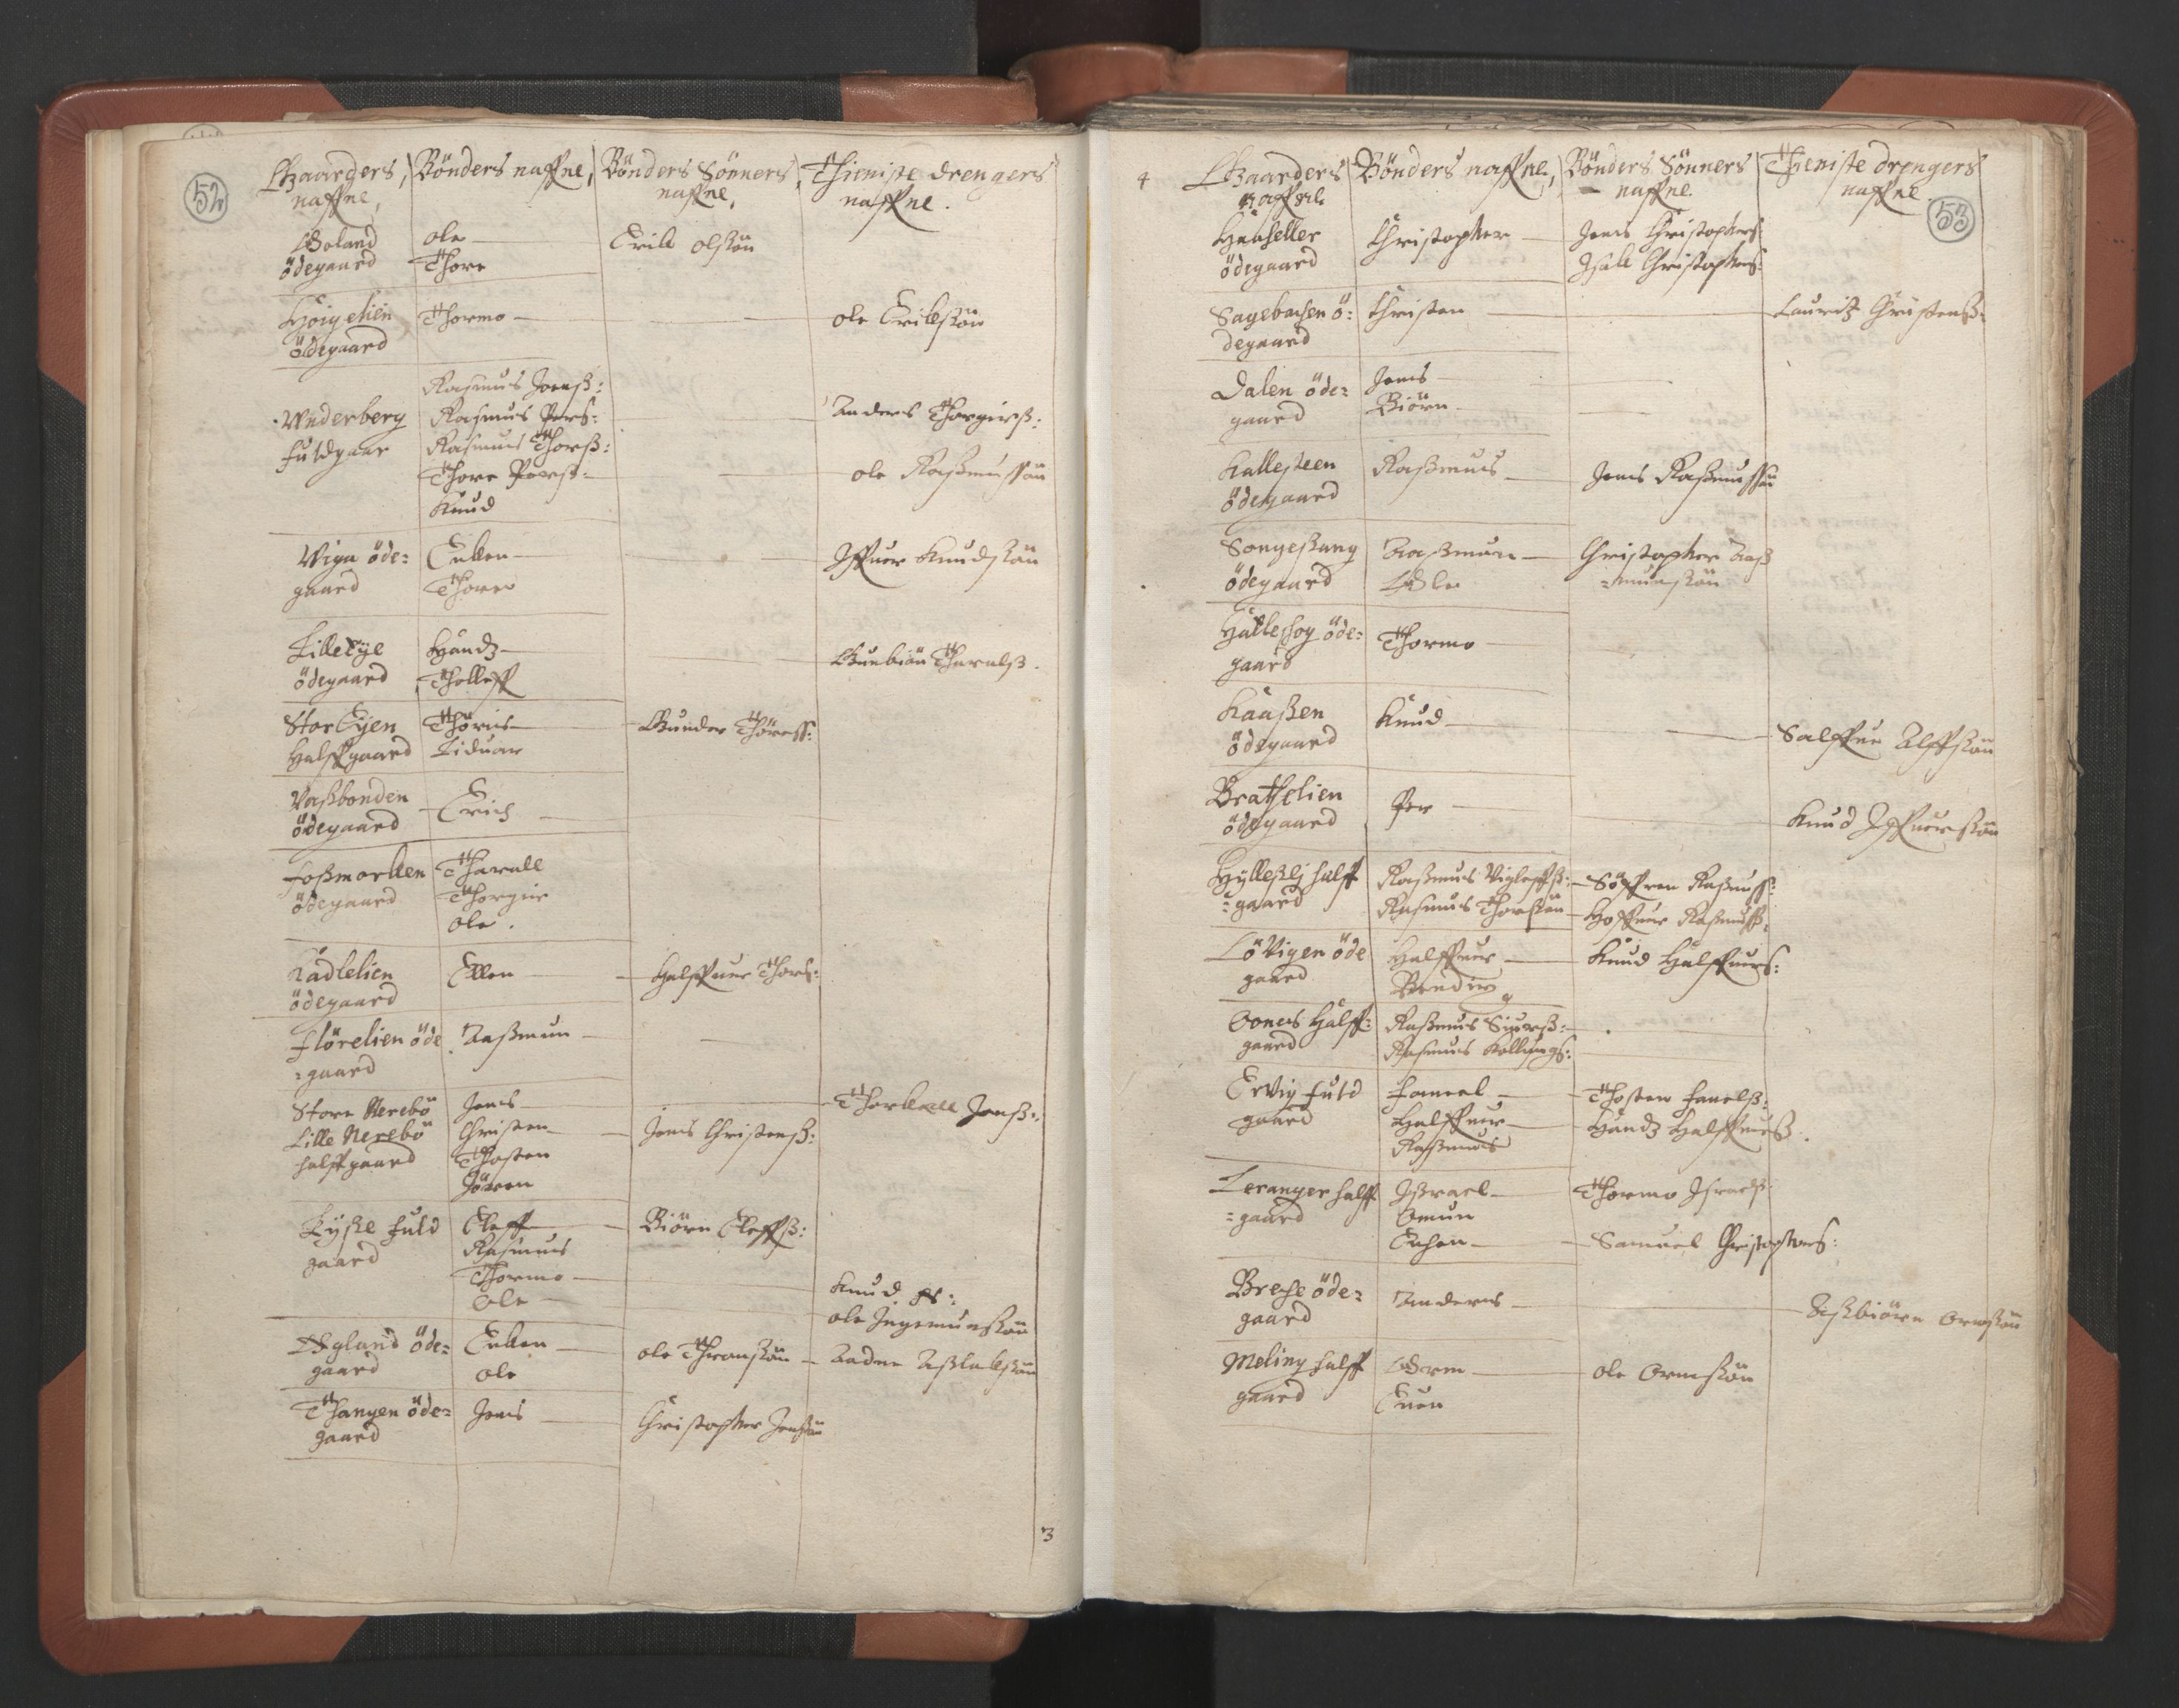 RA, Vicar's Census 1664-1666, no. 18: Stavanger deanery and Karmsund deanery, 1664-1666, p. 52-53